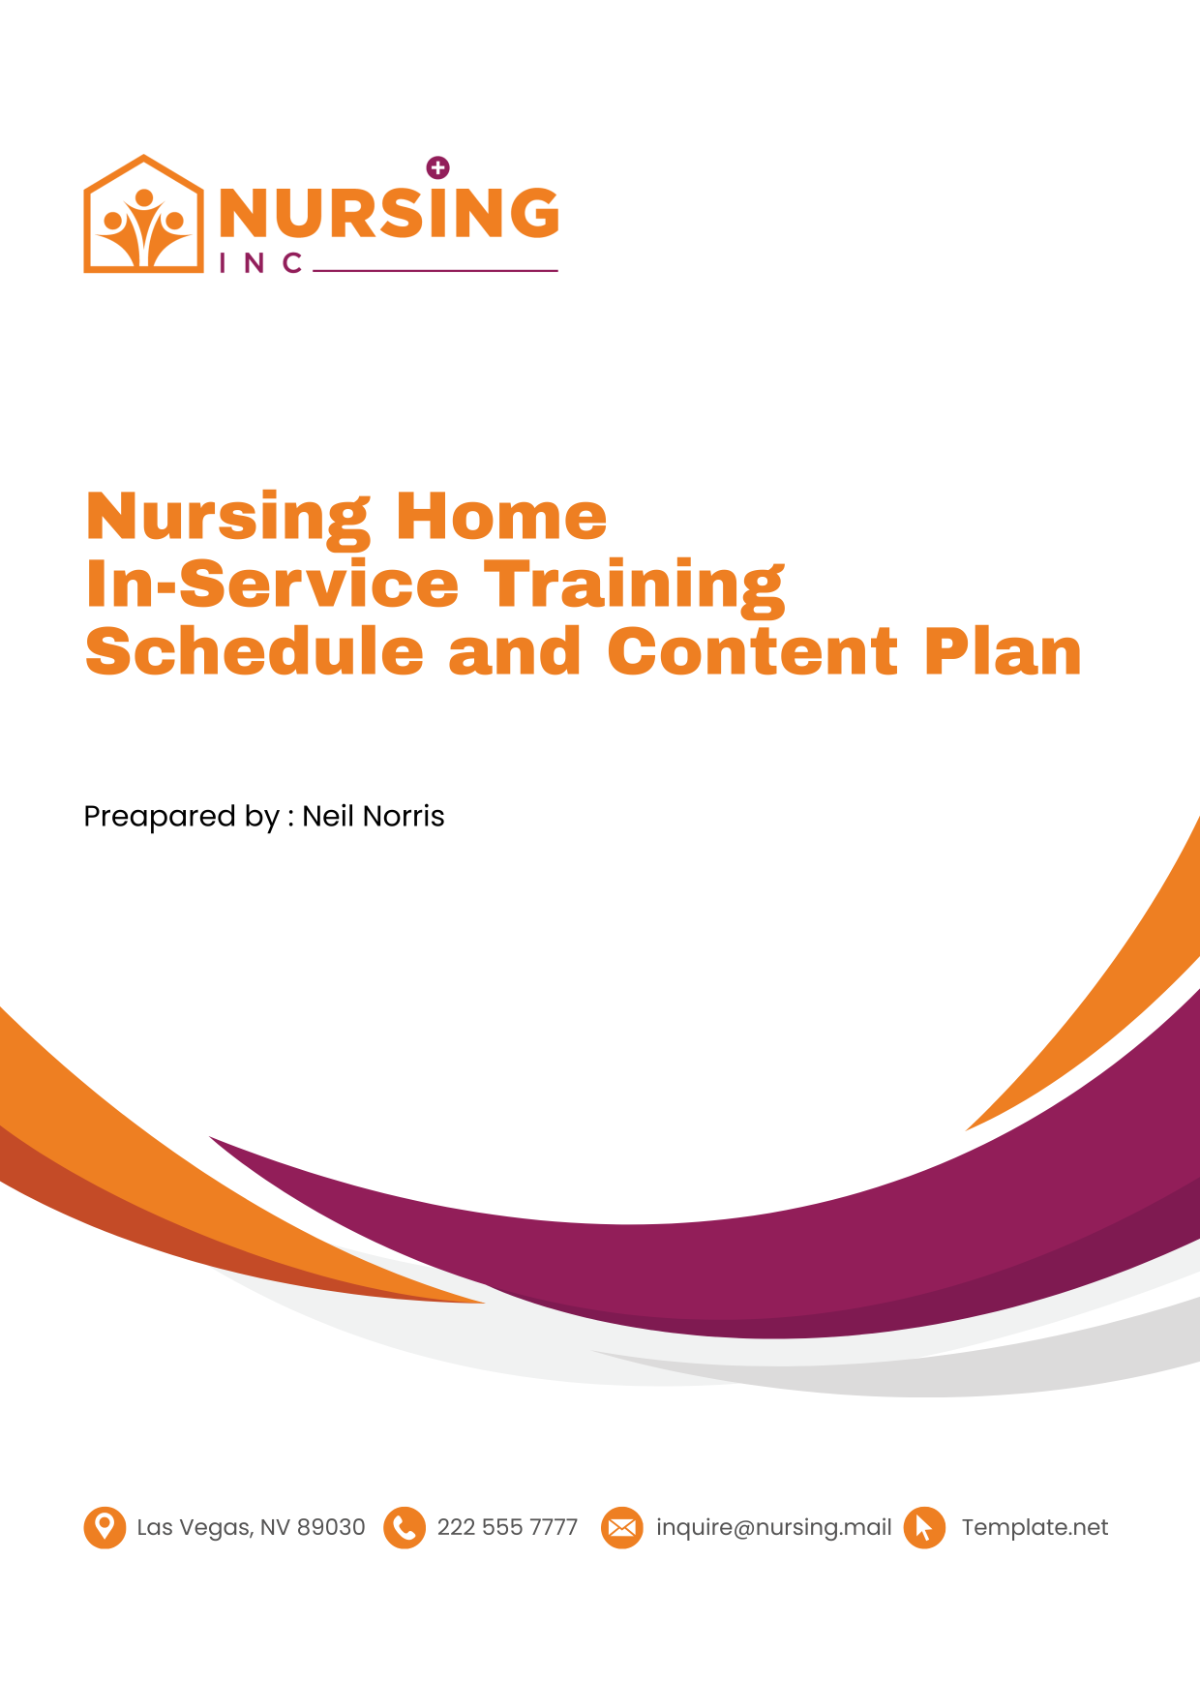 Nursing Home In-Service Training Schedule and Content Plan Template